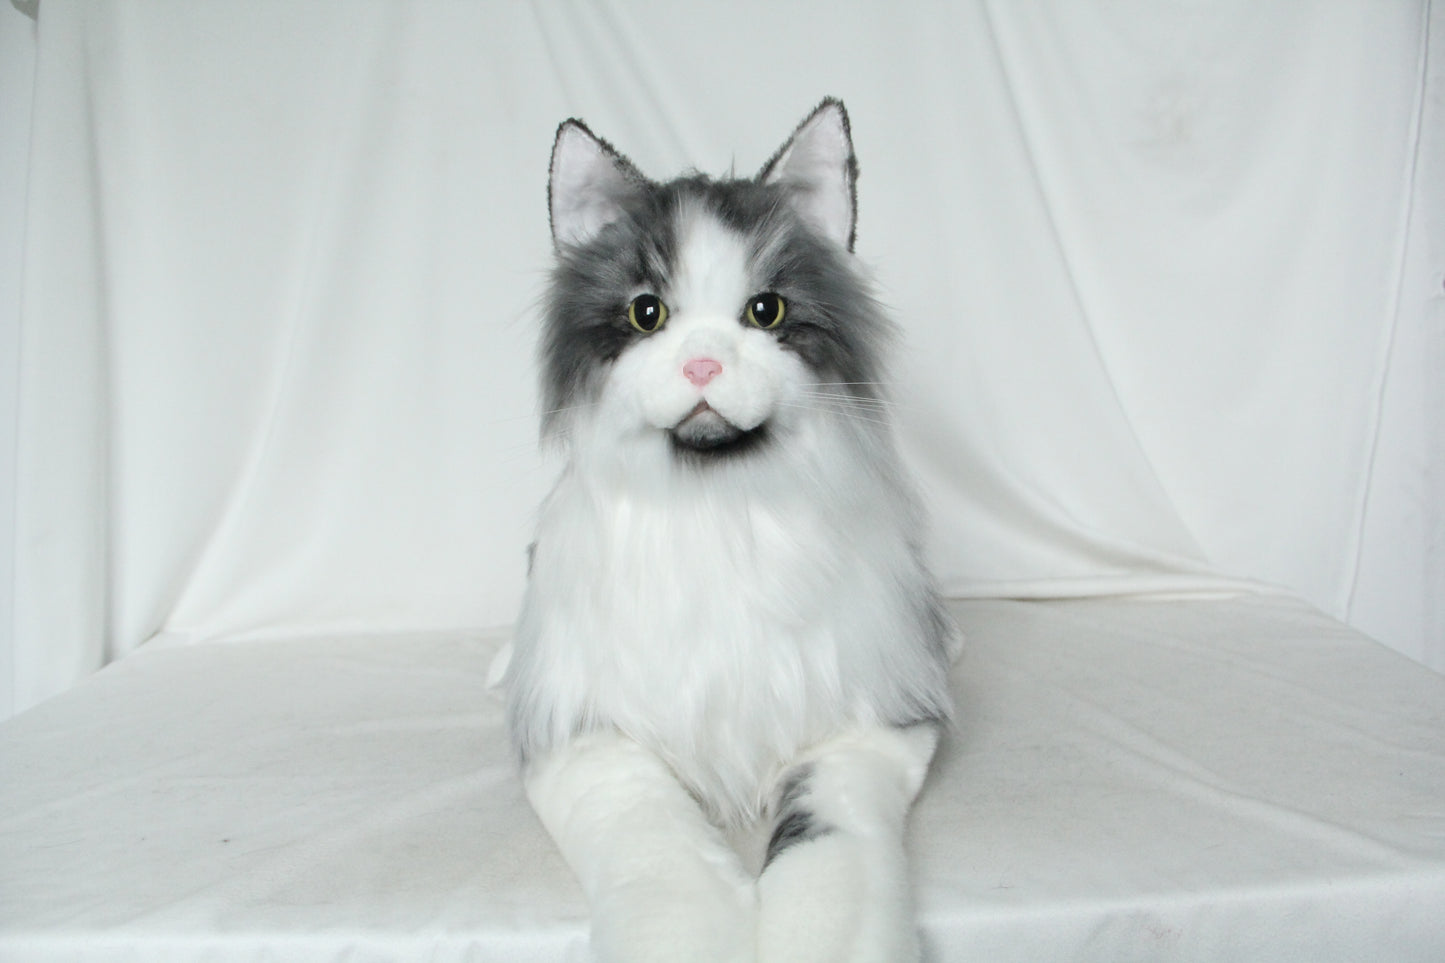 NO.37  55cm  Long-haired gray cat in lying position